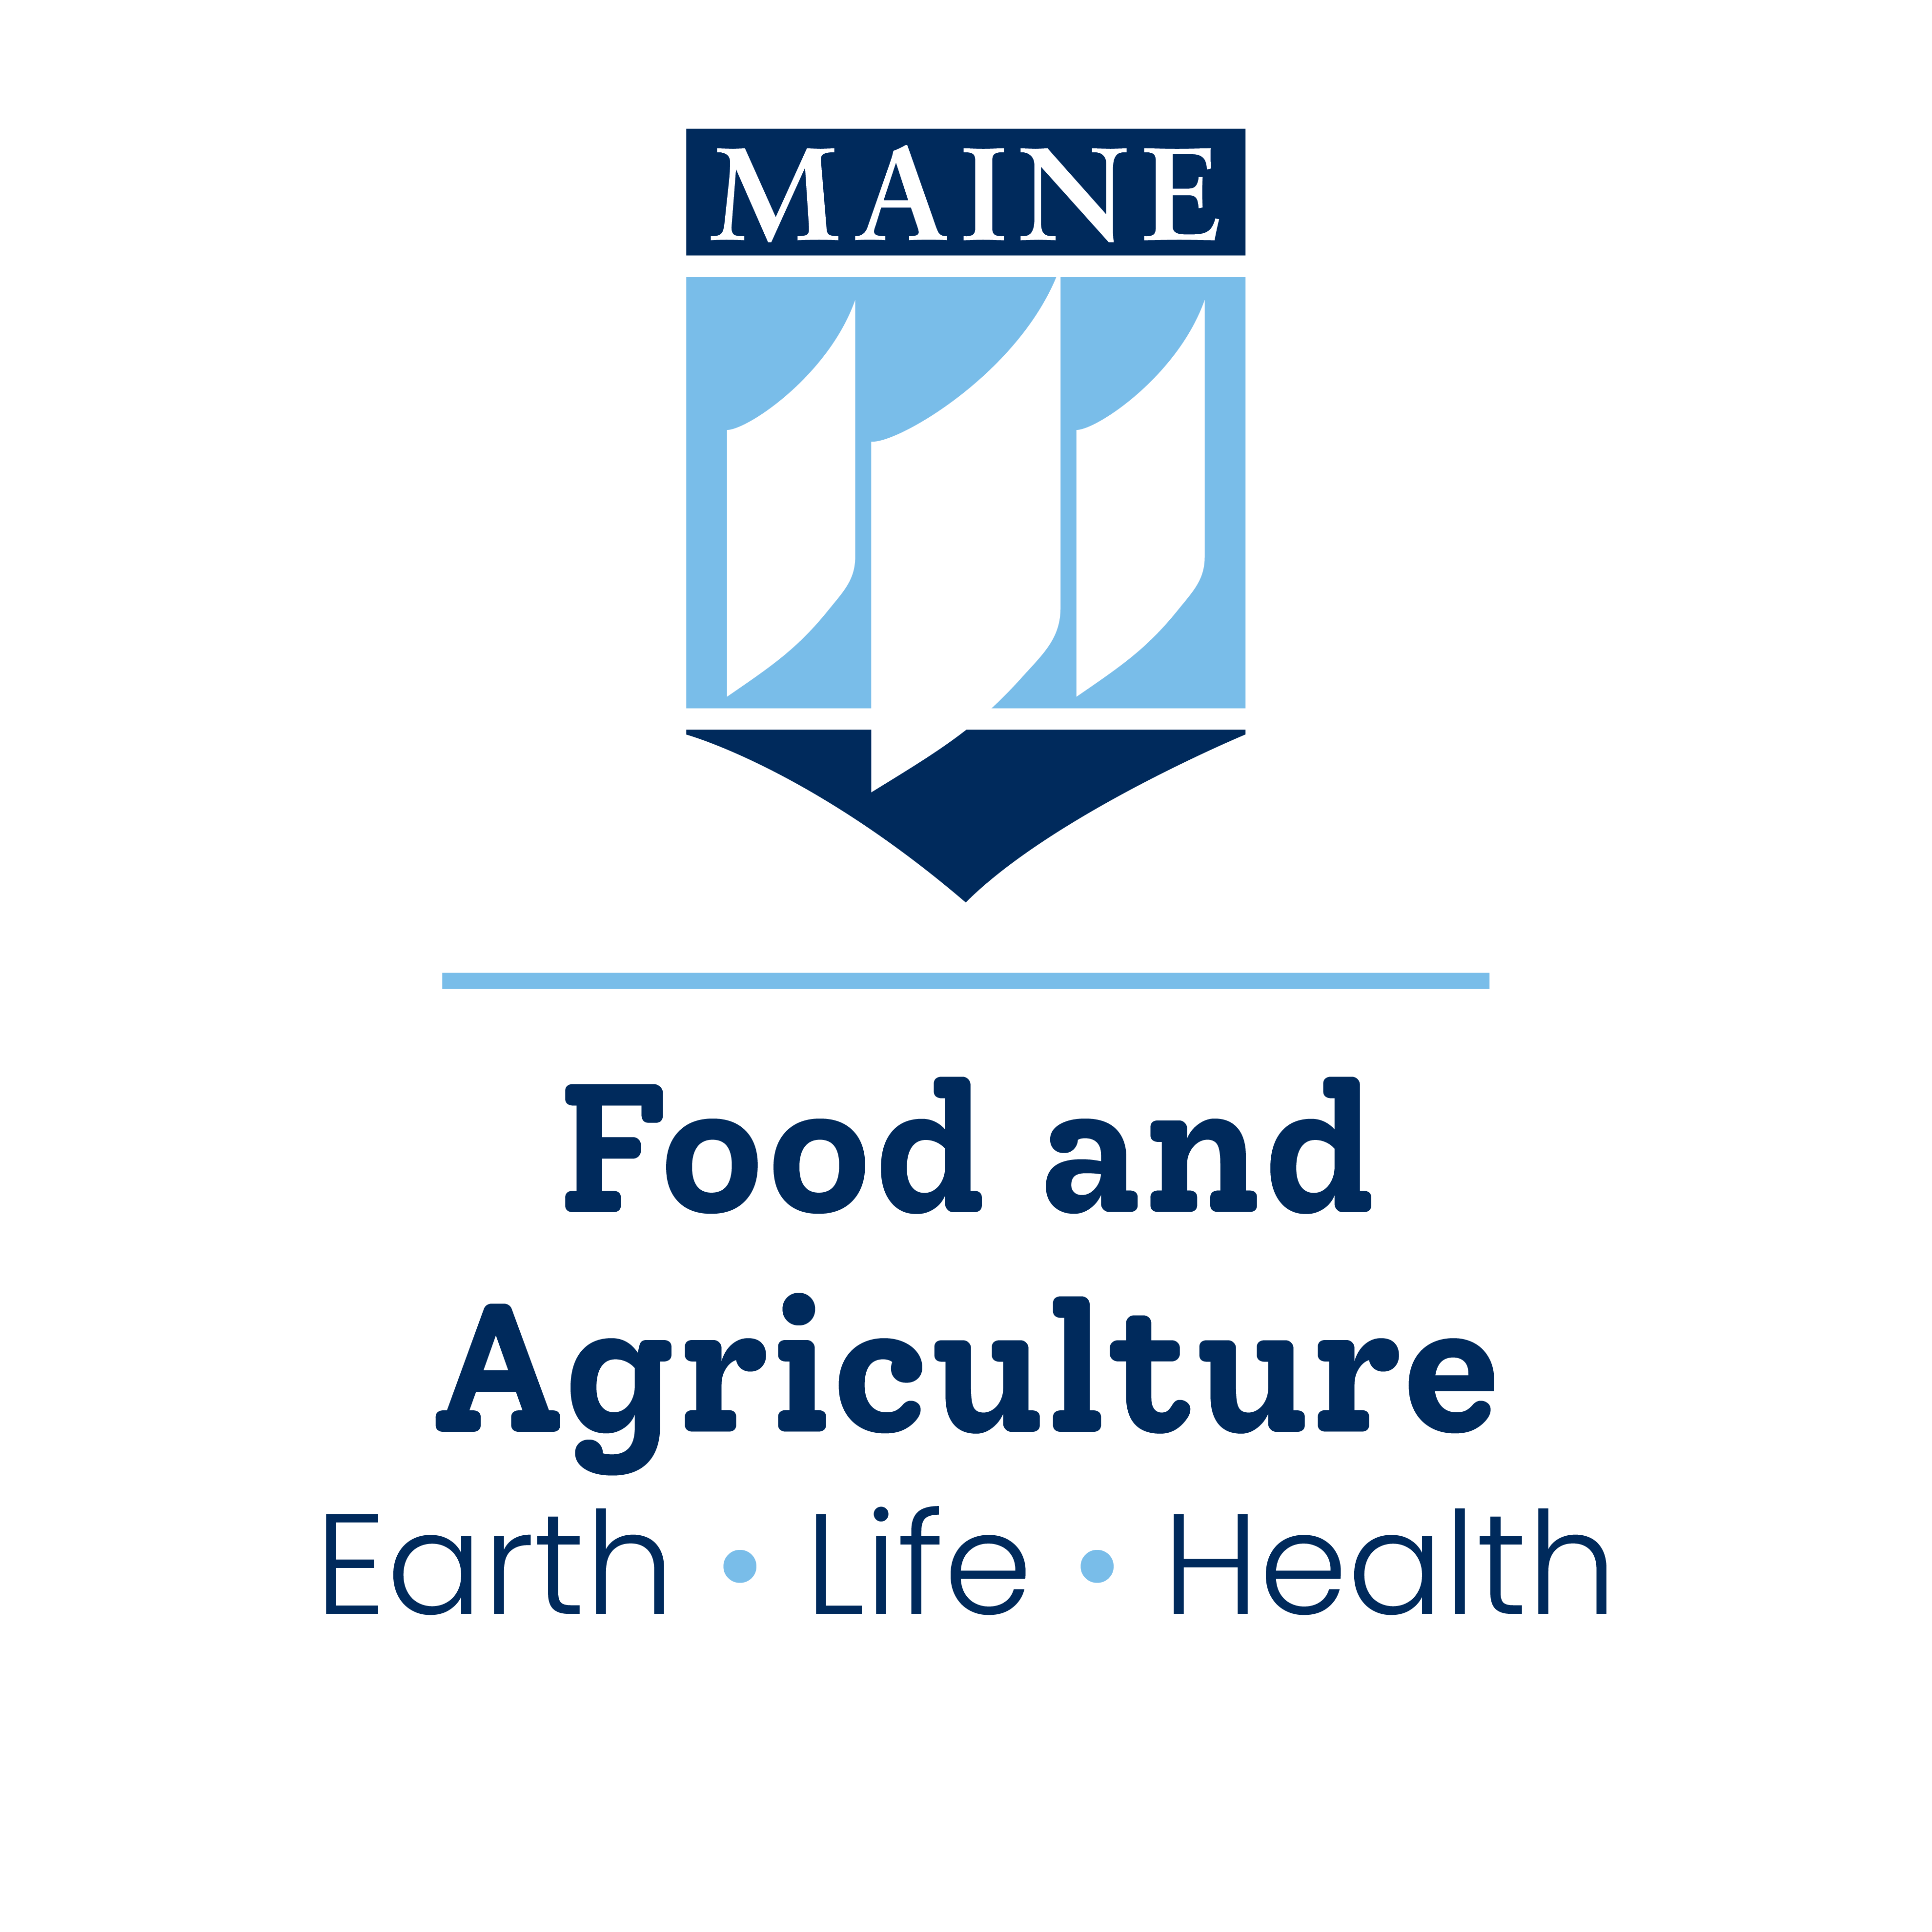 UMaine crest, food and agriculture, earth • life • health